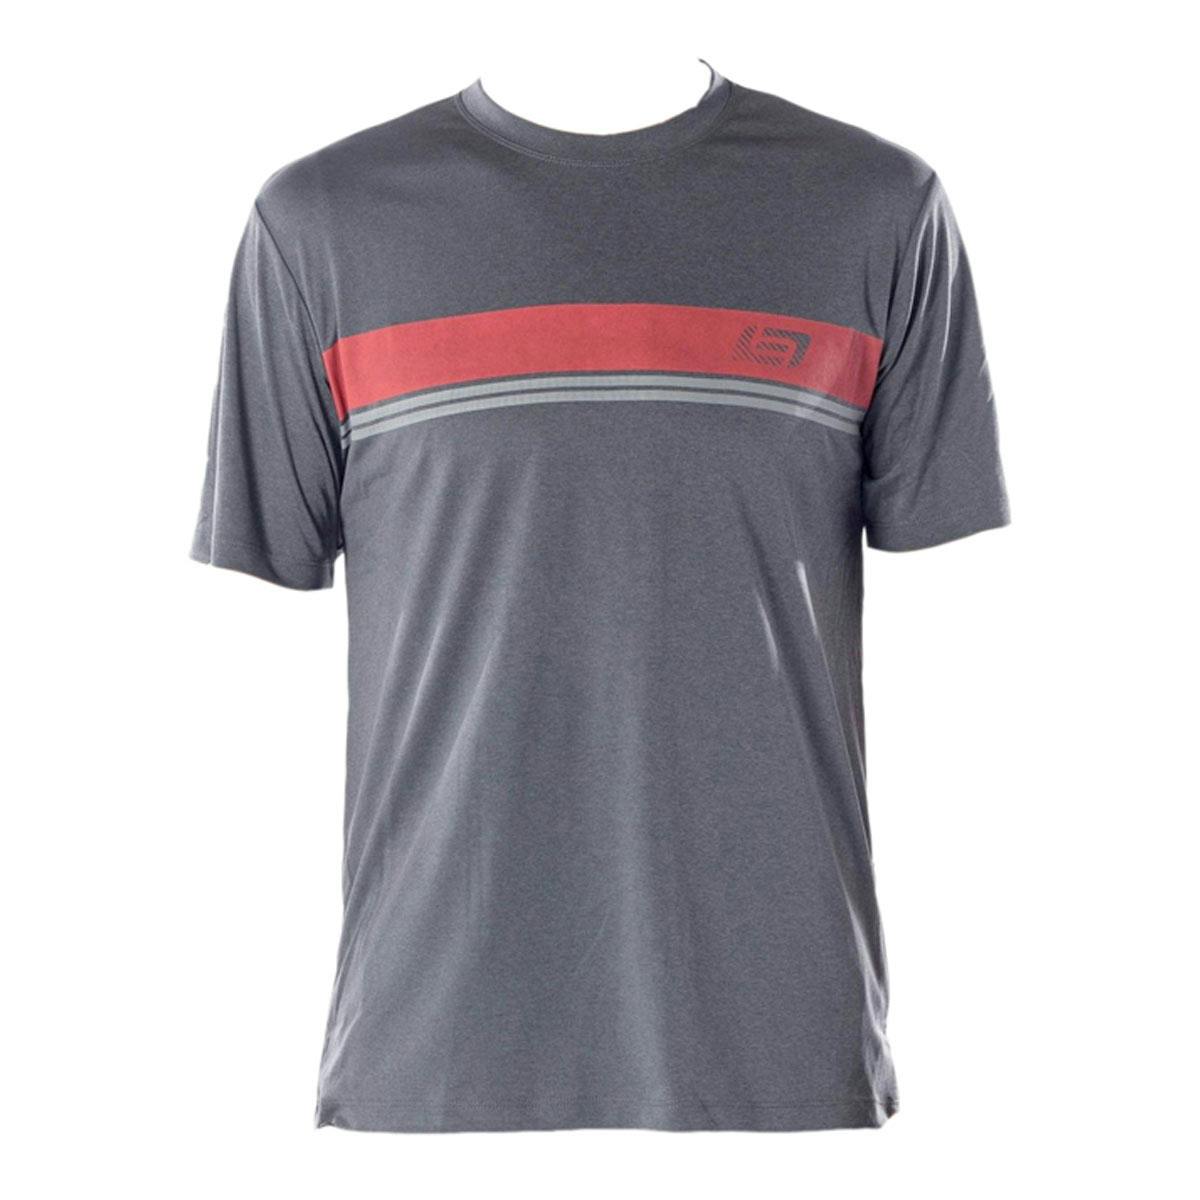 Bellwether Powerline Jersey - Charcoal - Small